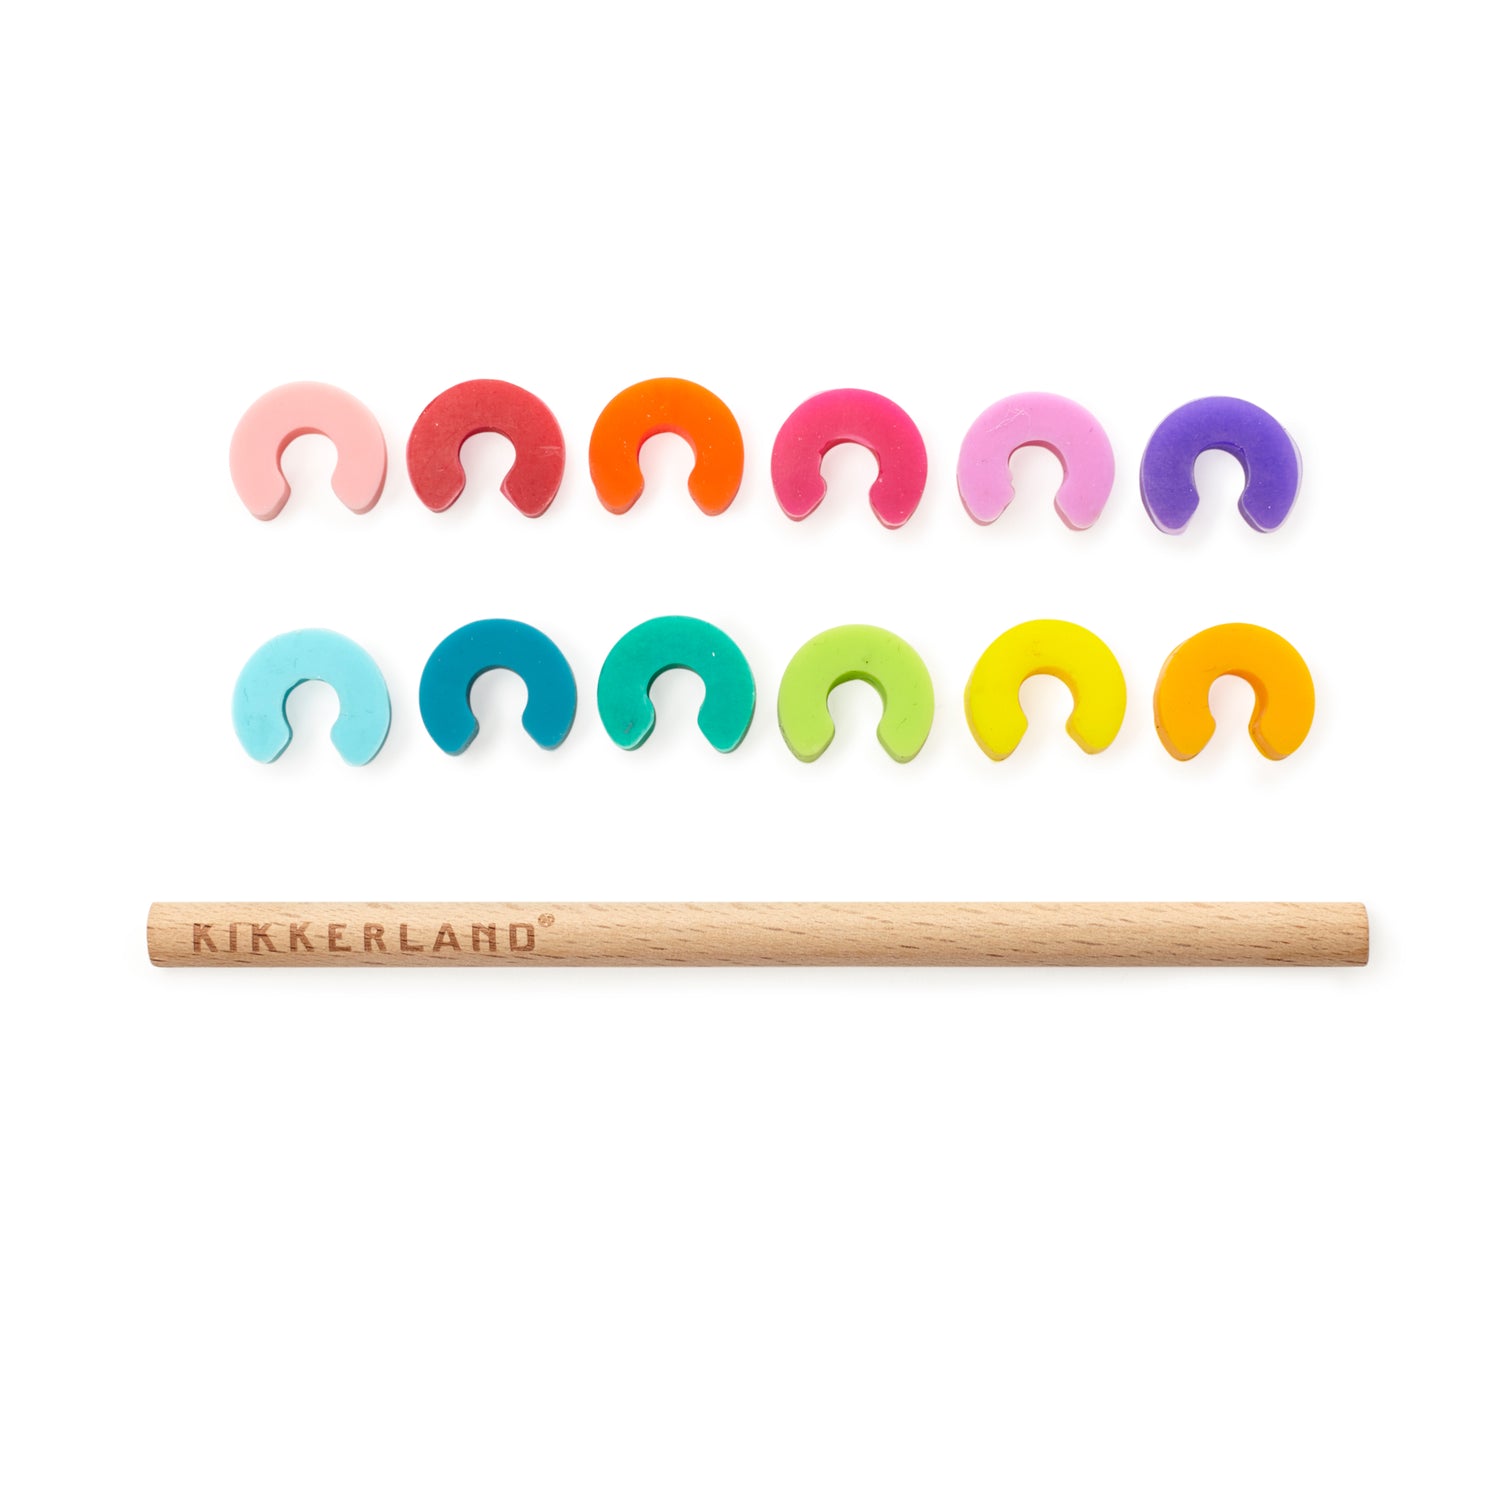 Rainbow Drink Markers